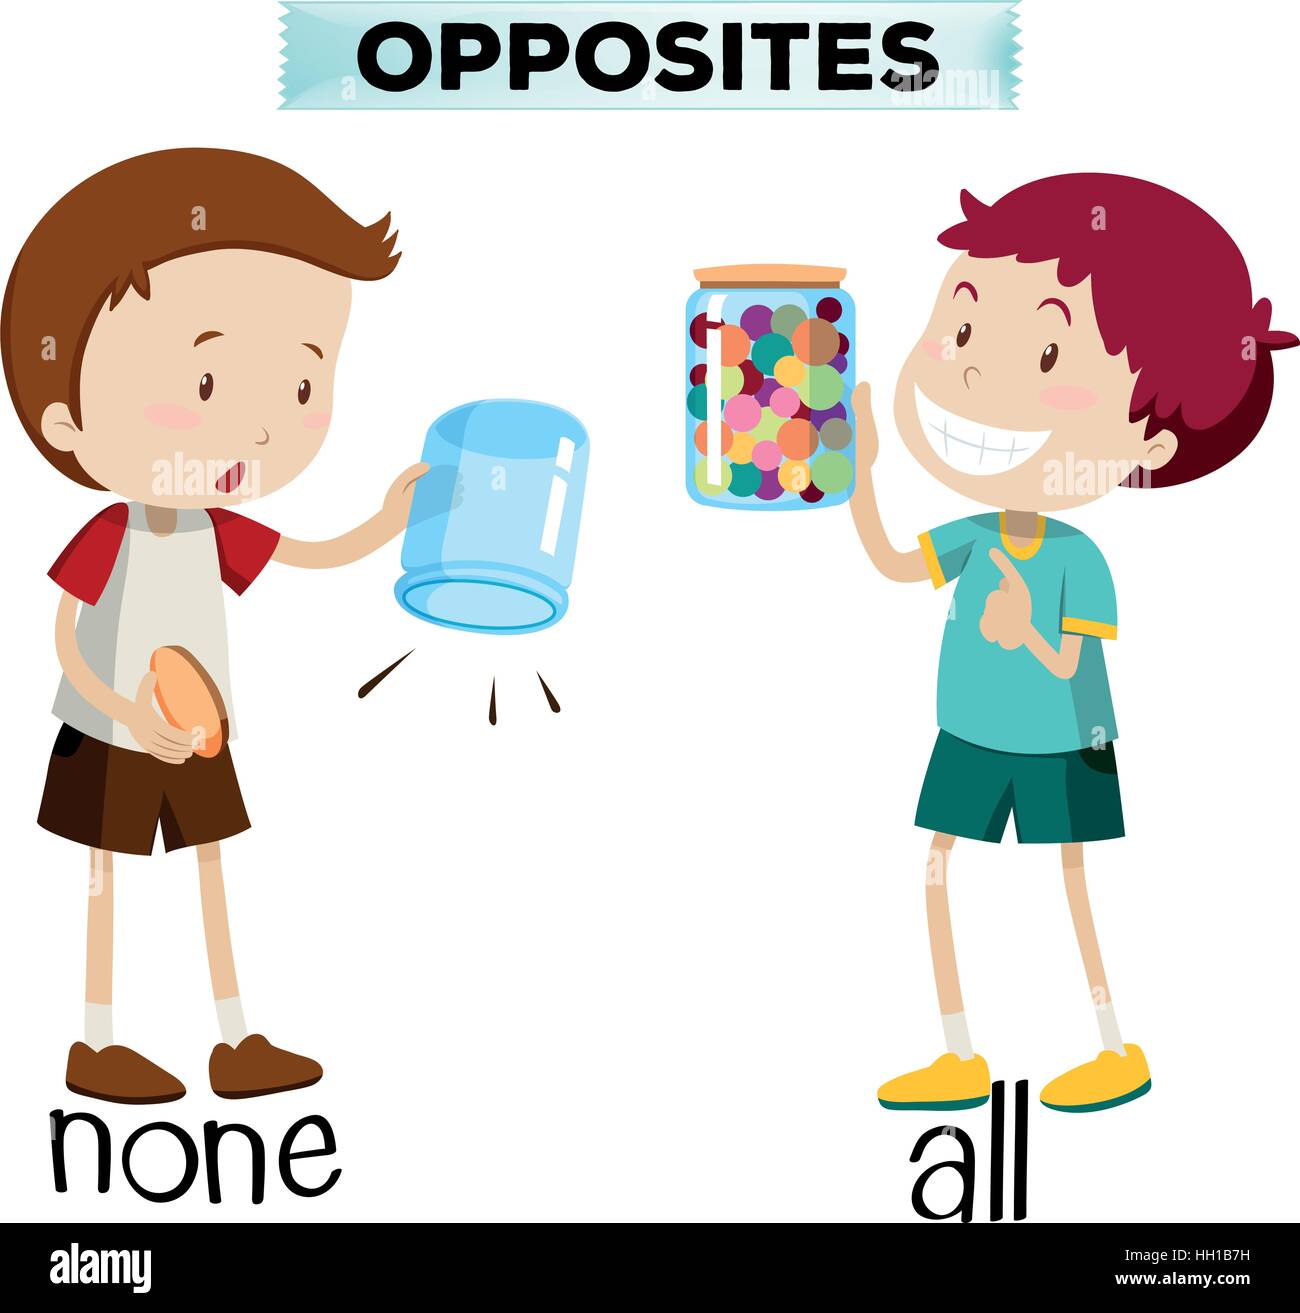 Opposite words for none and all illustration Stock Vector Art